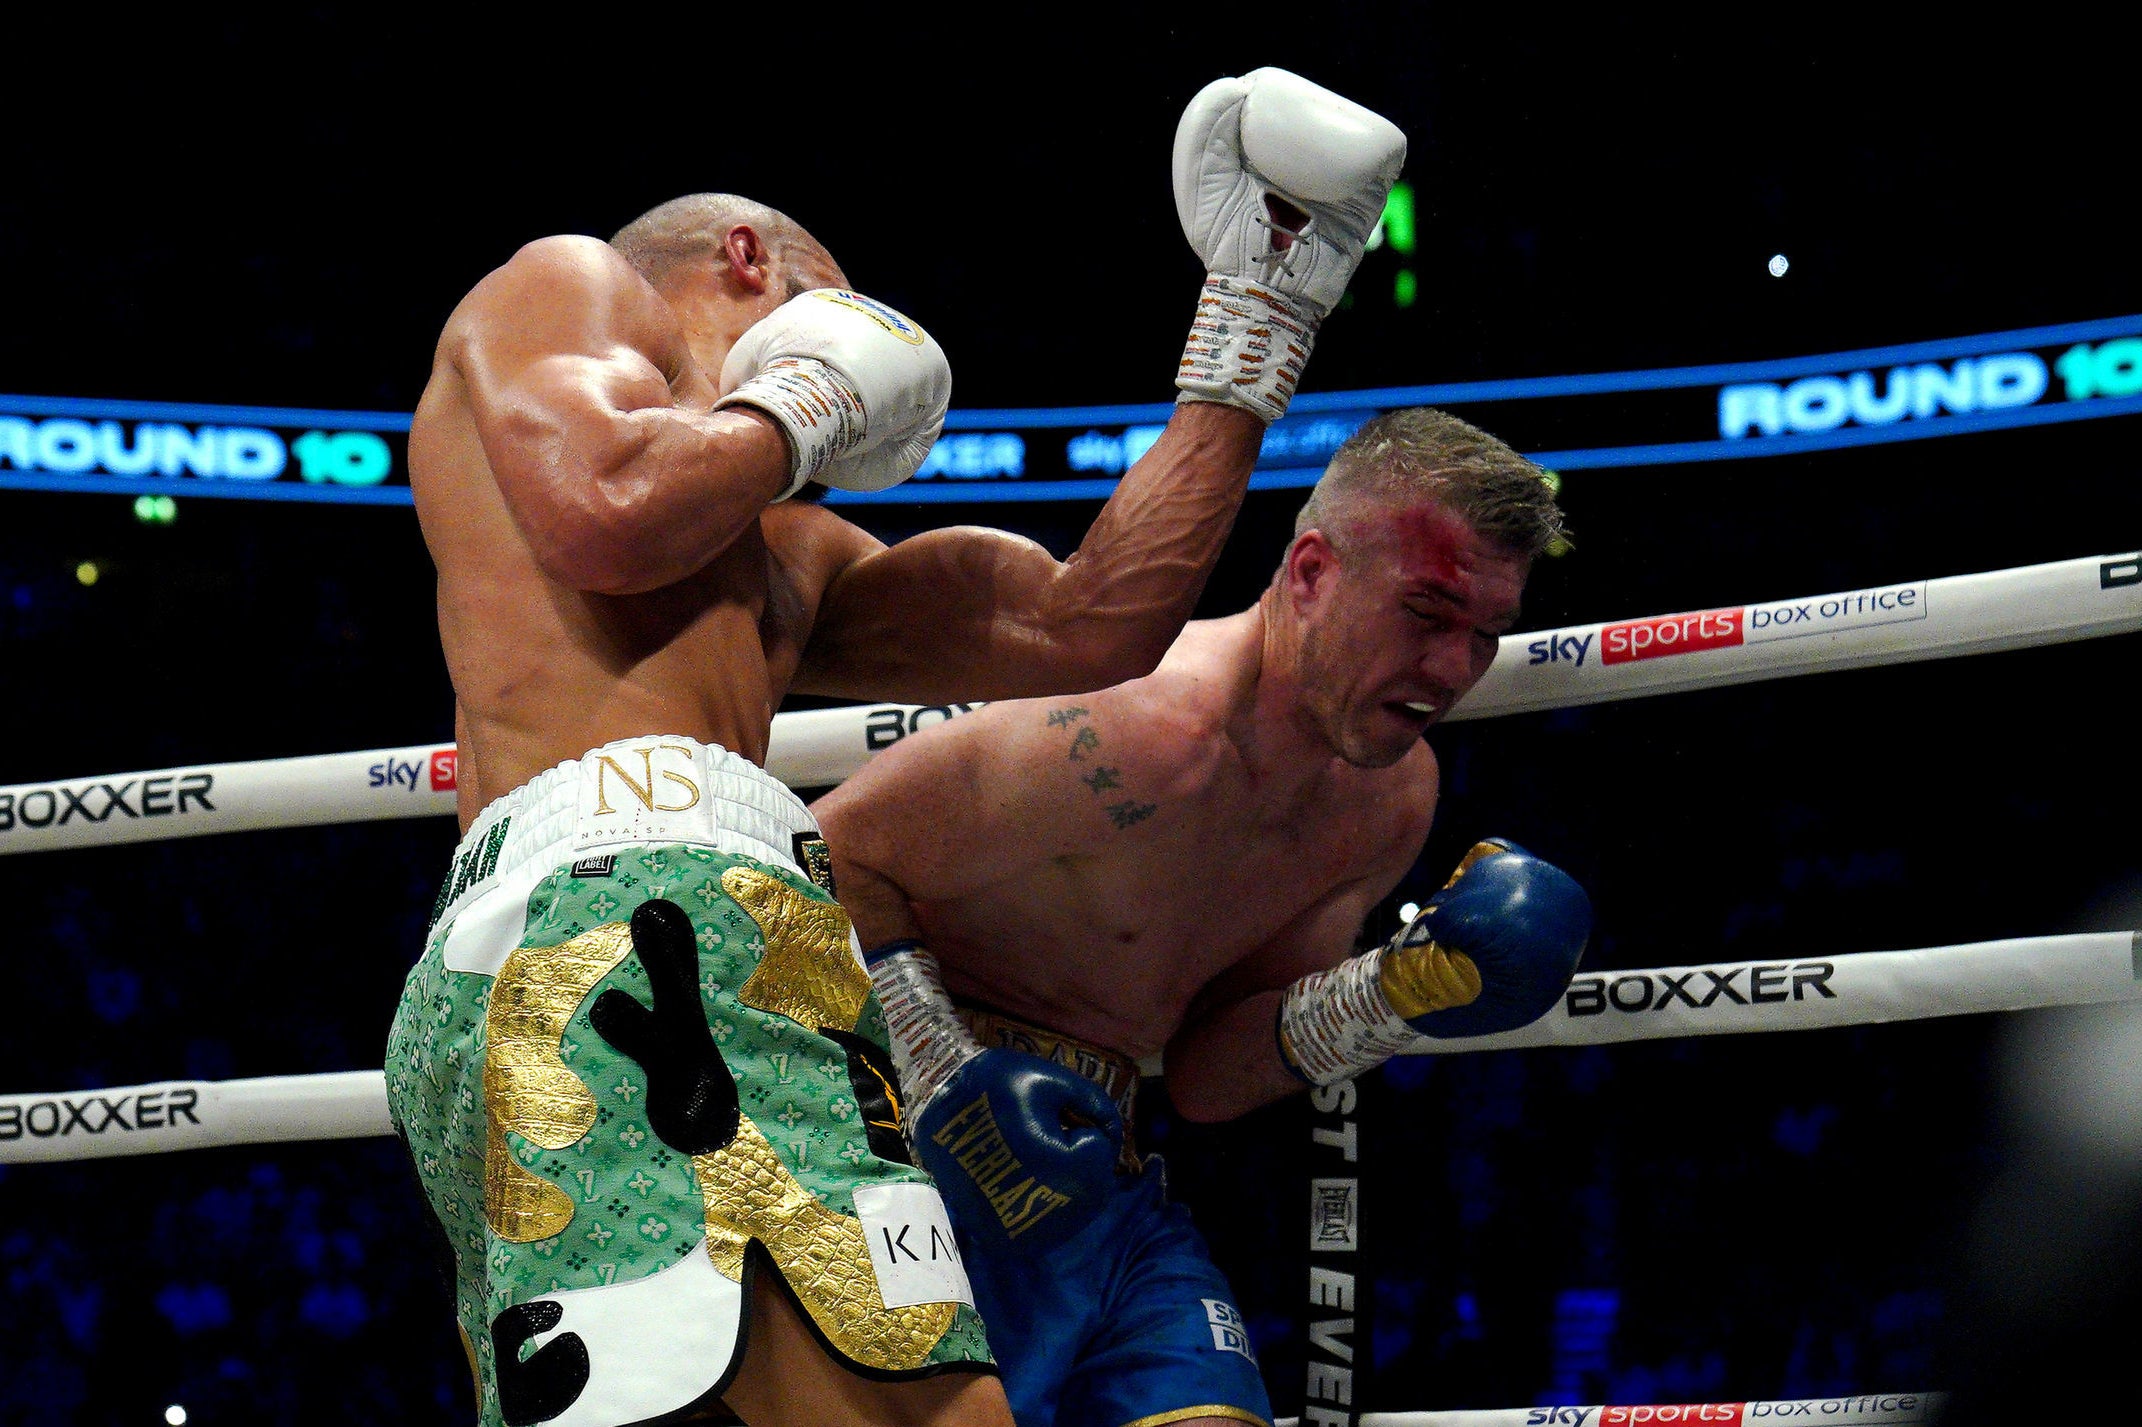 Chris Eubank Jr vs Liam Smith 2 LIVE Results from rematch after late TKO The Independent